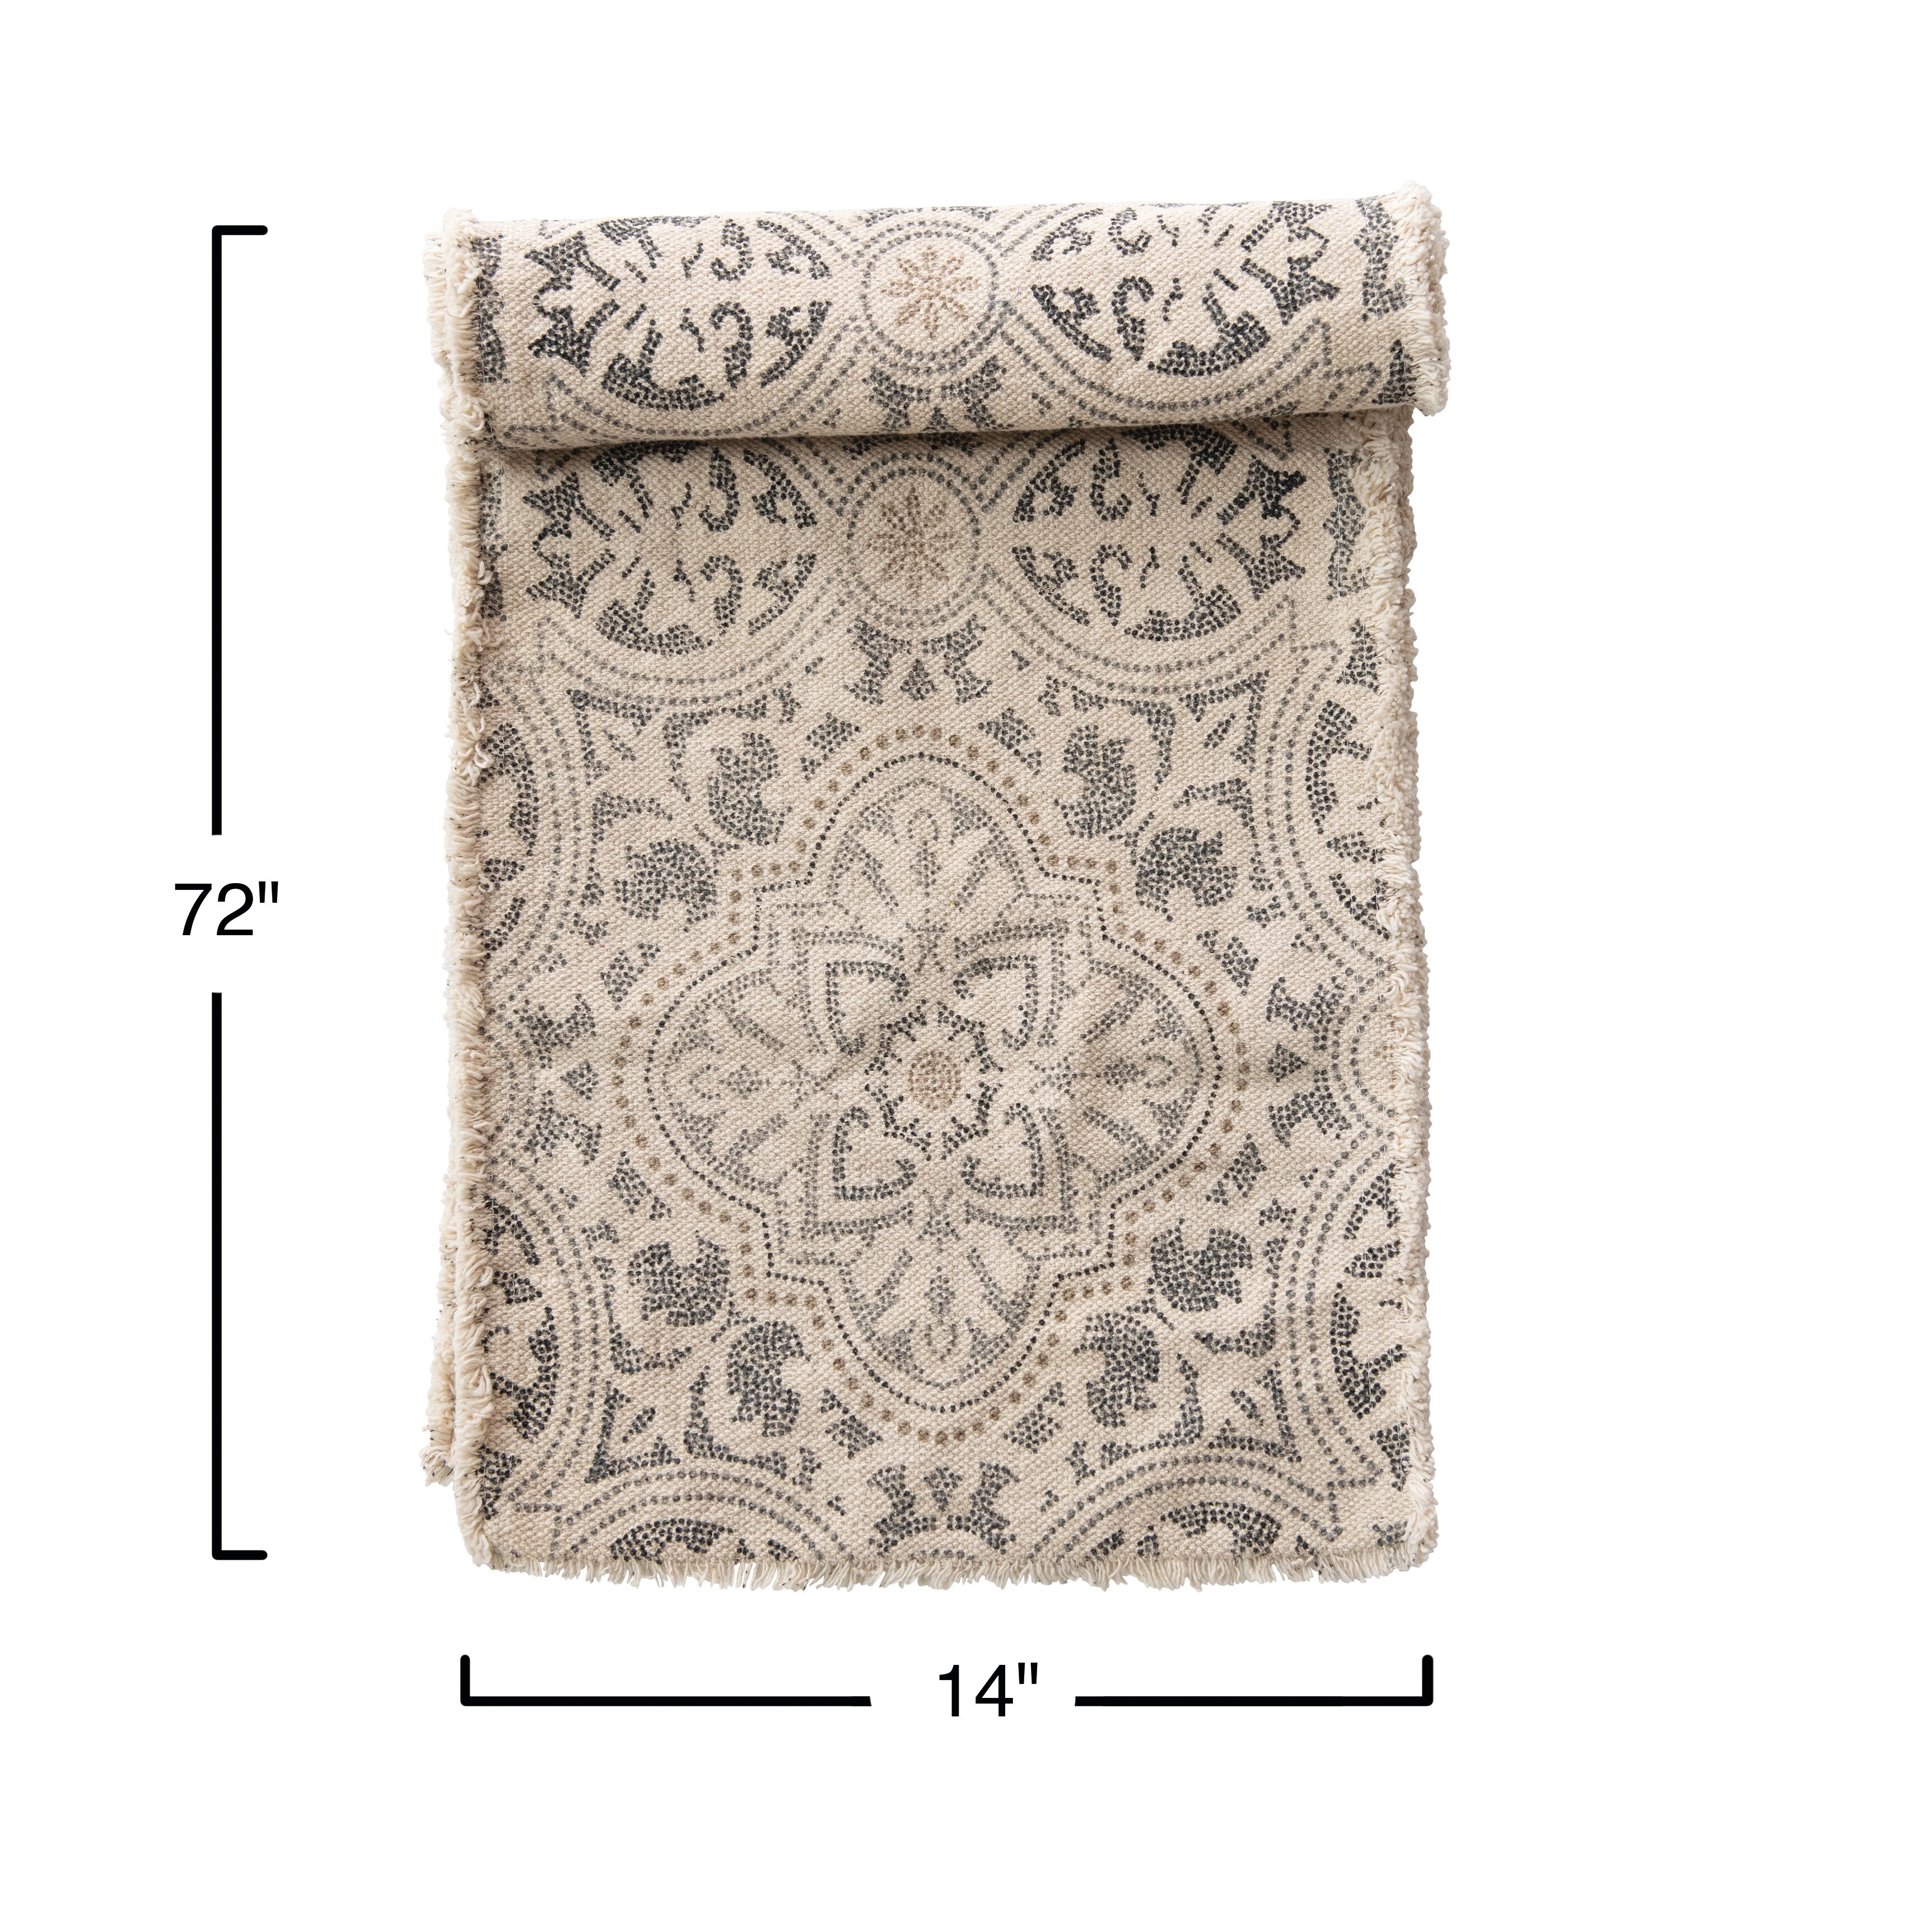 https://ak1.ostkcdn.com/images/products/is/images/direct/5b87eed8697b12c55bba687ce9776d6a9d3a1f54/Cotton-Printed-Table-Runner-with-Frayed-Edge.jpg